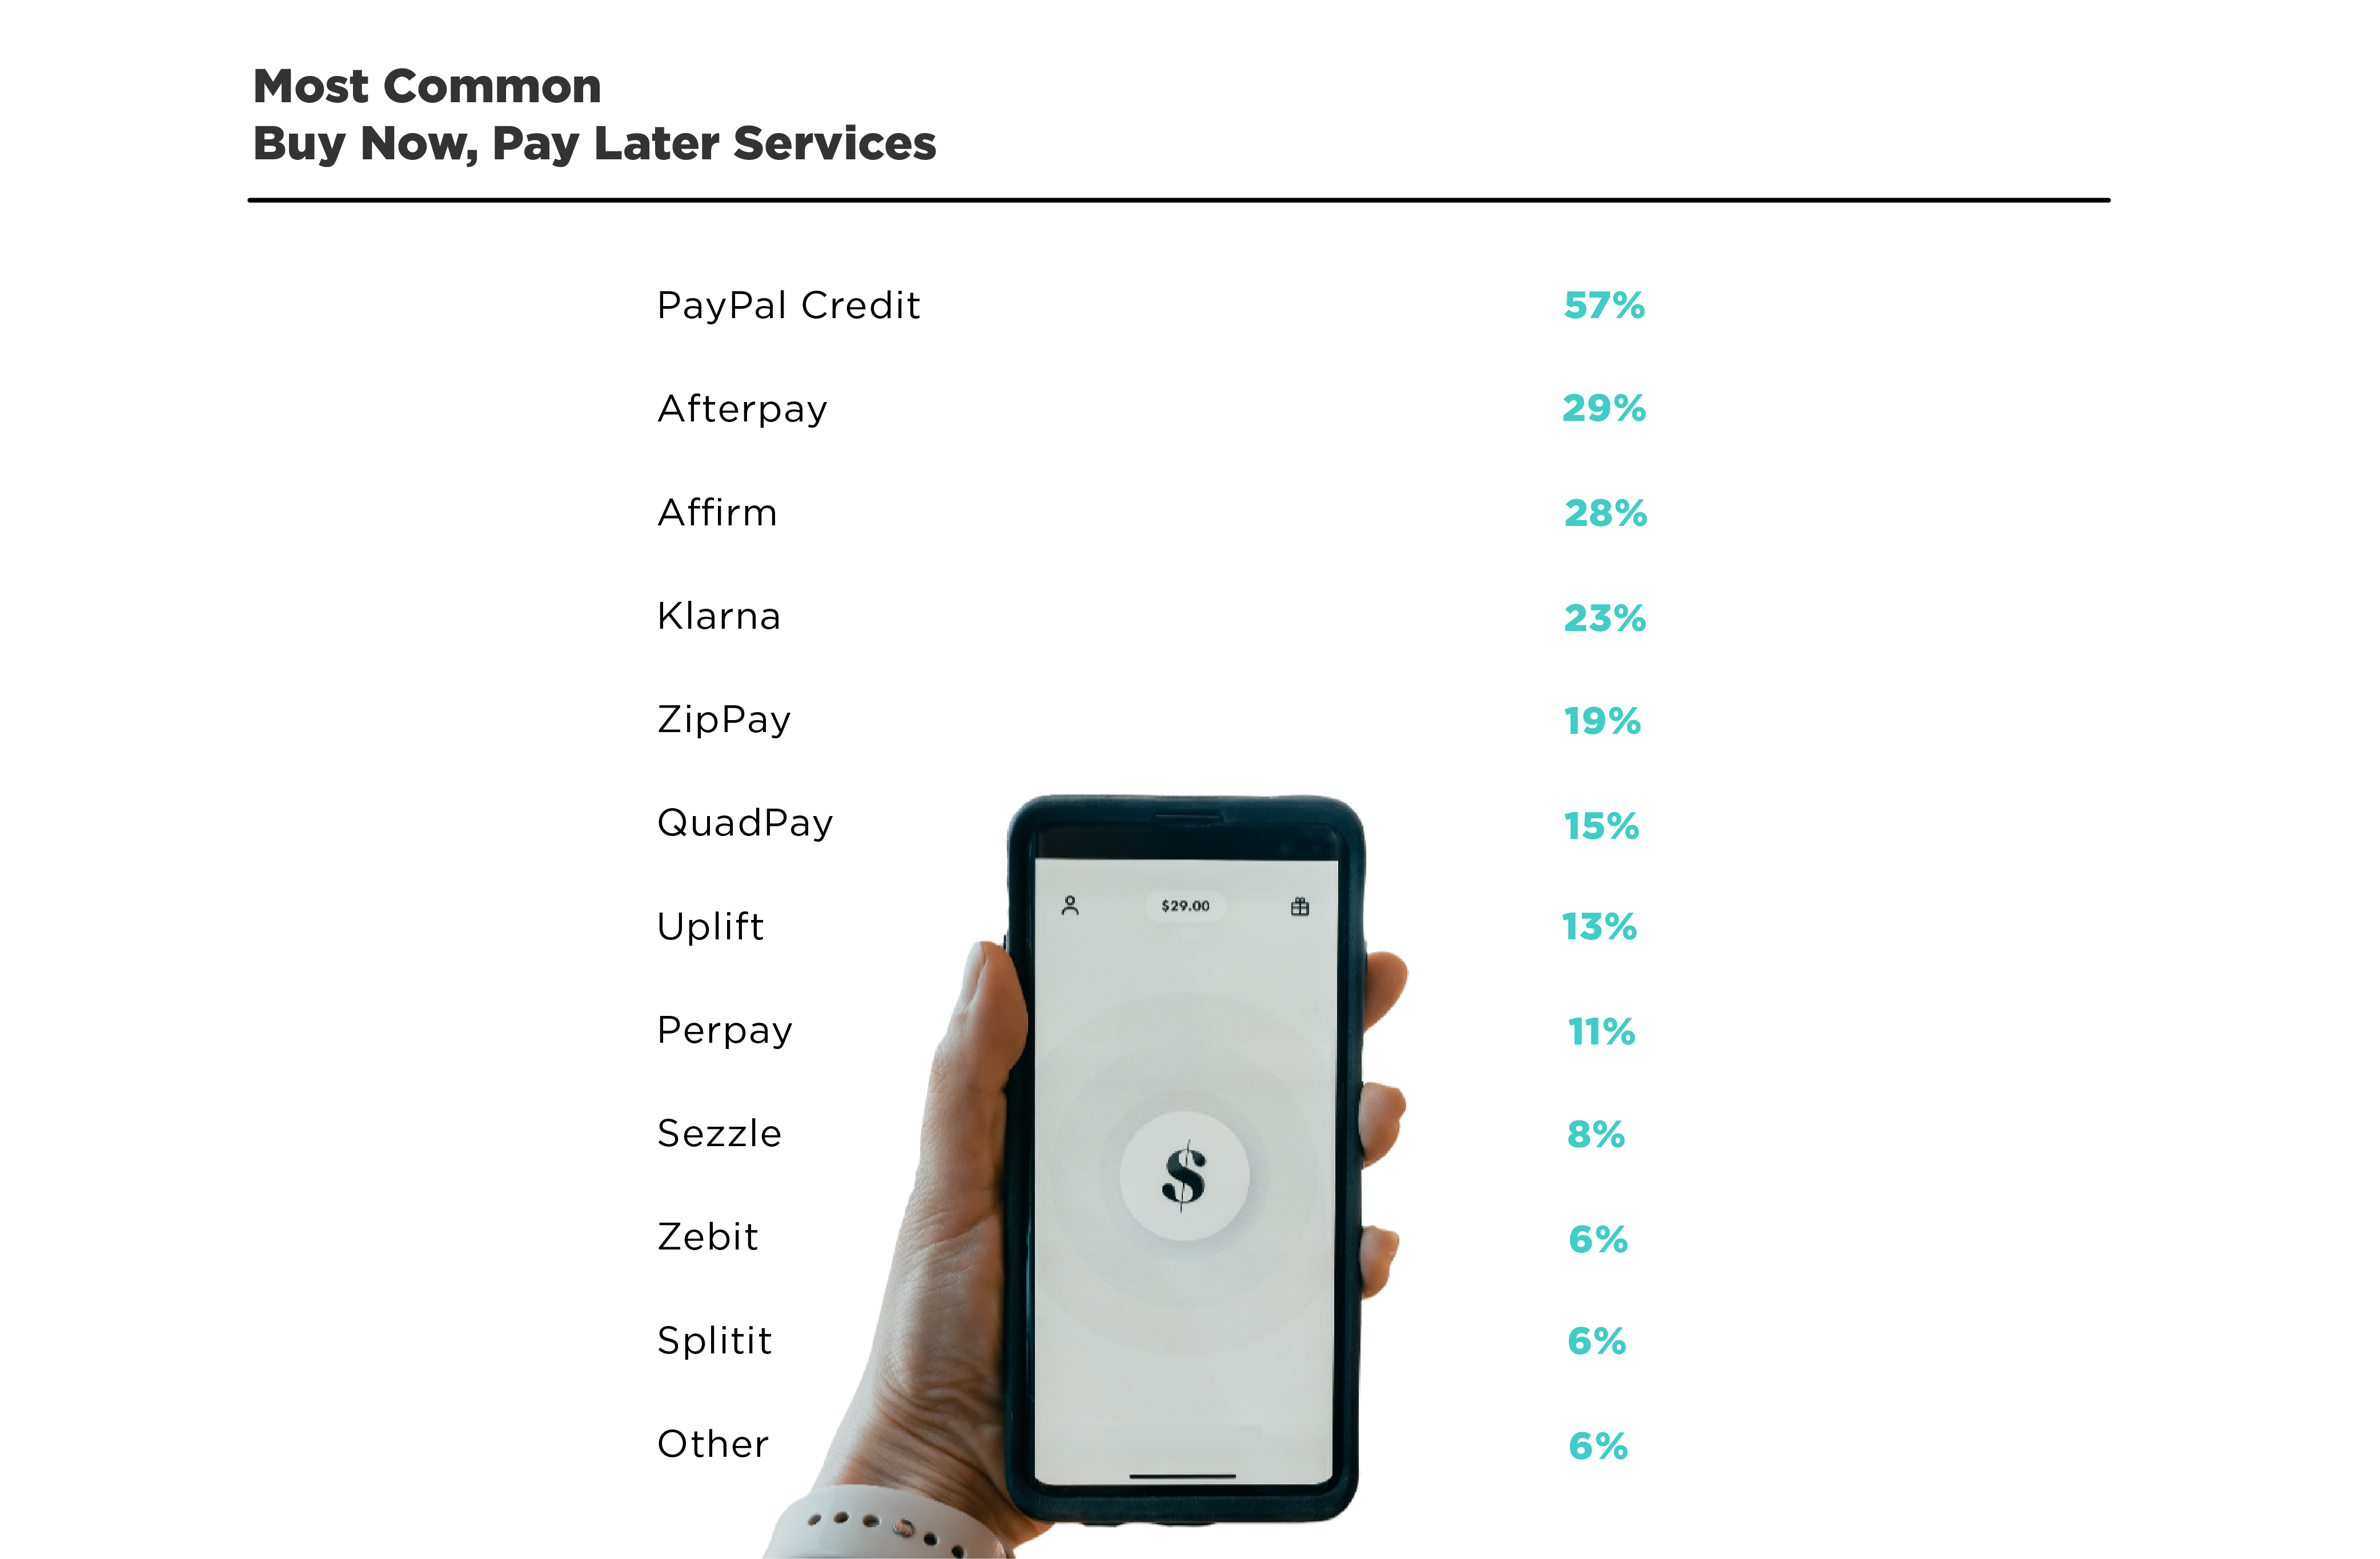 What Are the Most Popular Buy Now, Pay Later Services?